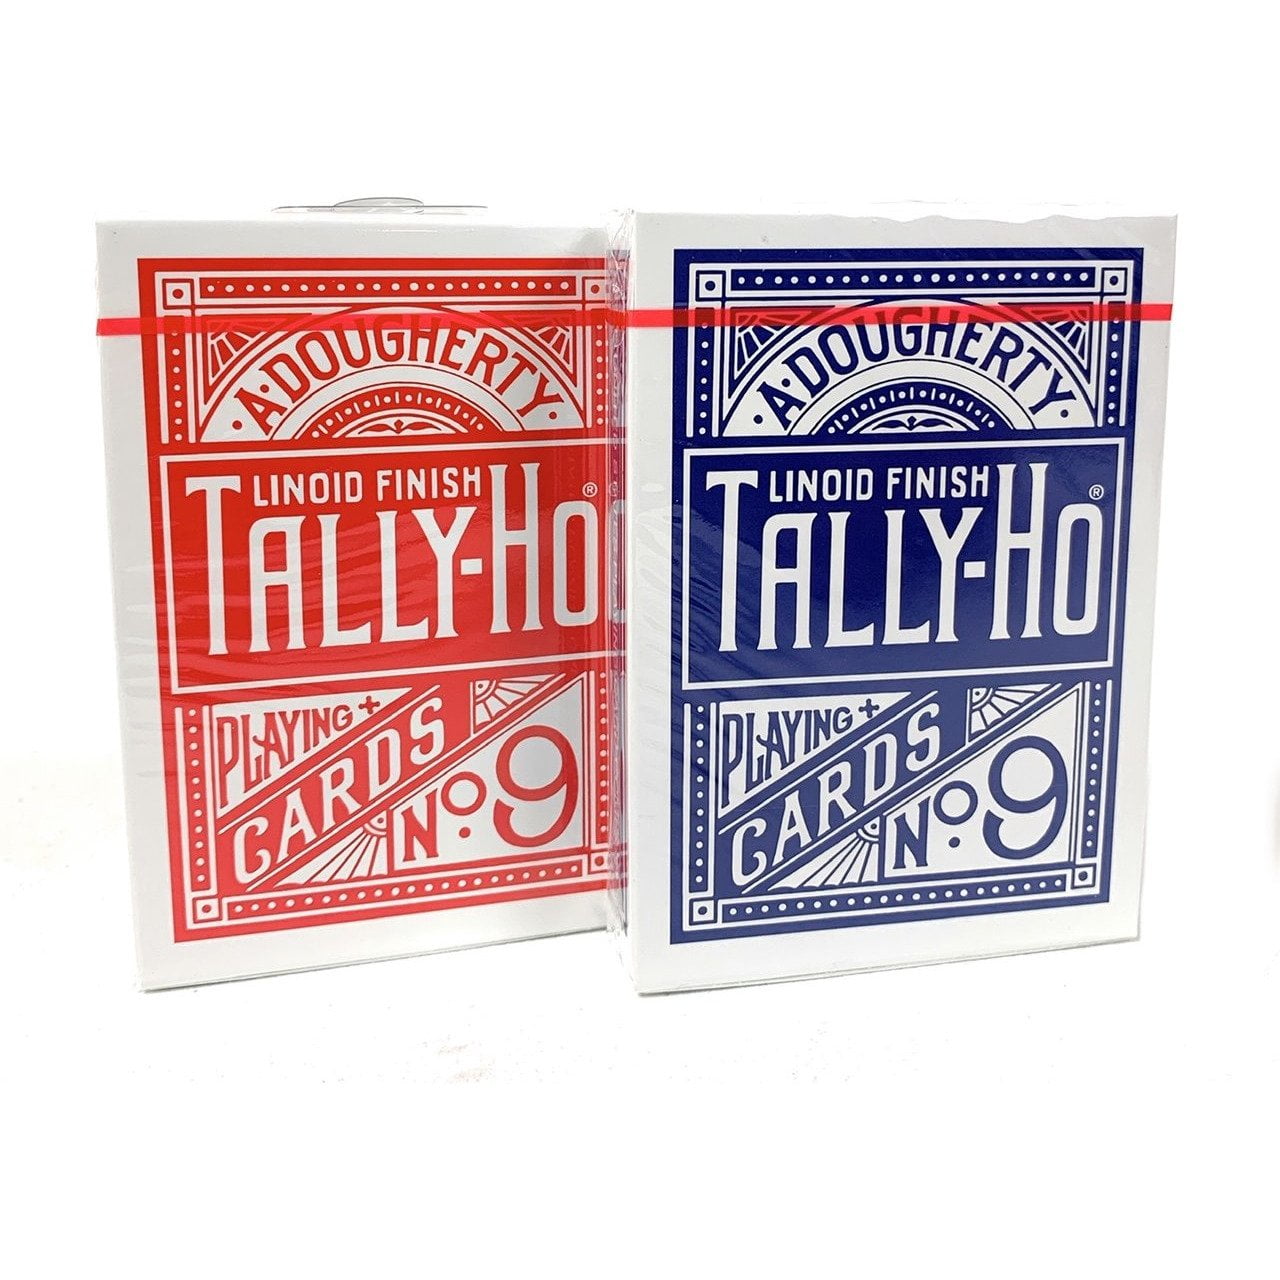 2 DECKS BICYCLE TALLY HO FAN BACK PLAYING CARDS STANDARD INDEX 1 RED 1 BLUE NEW 